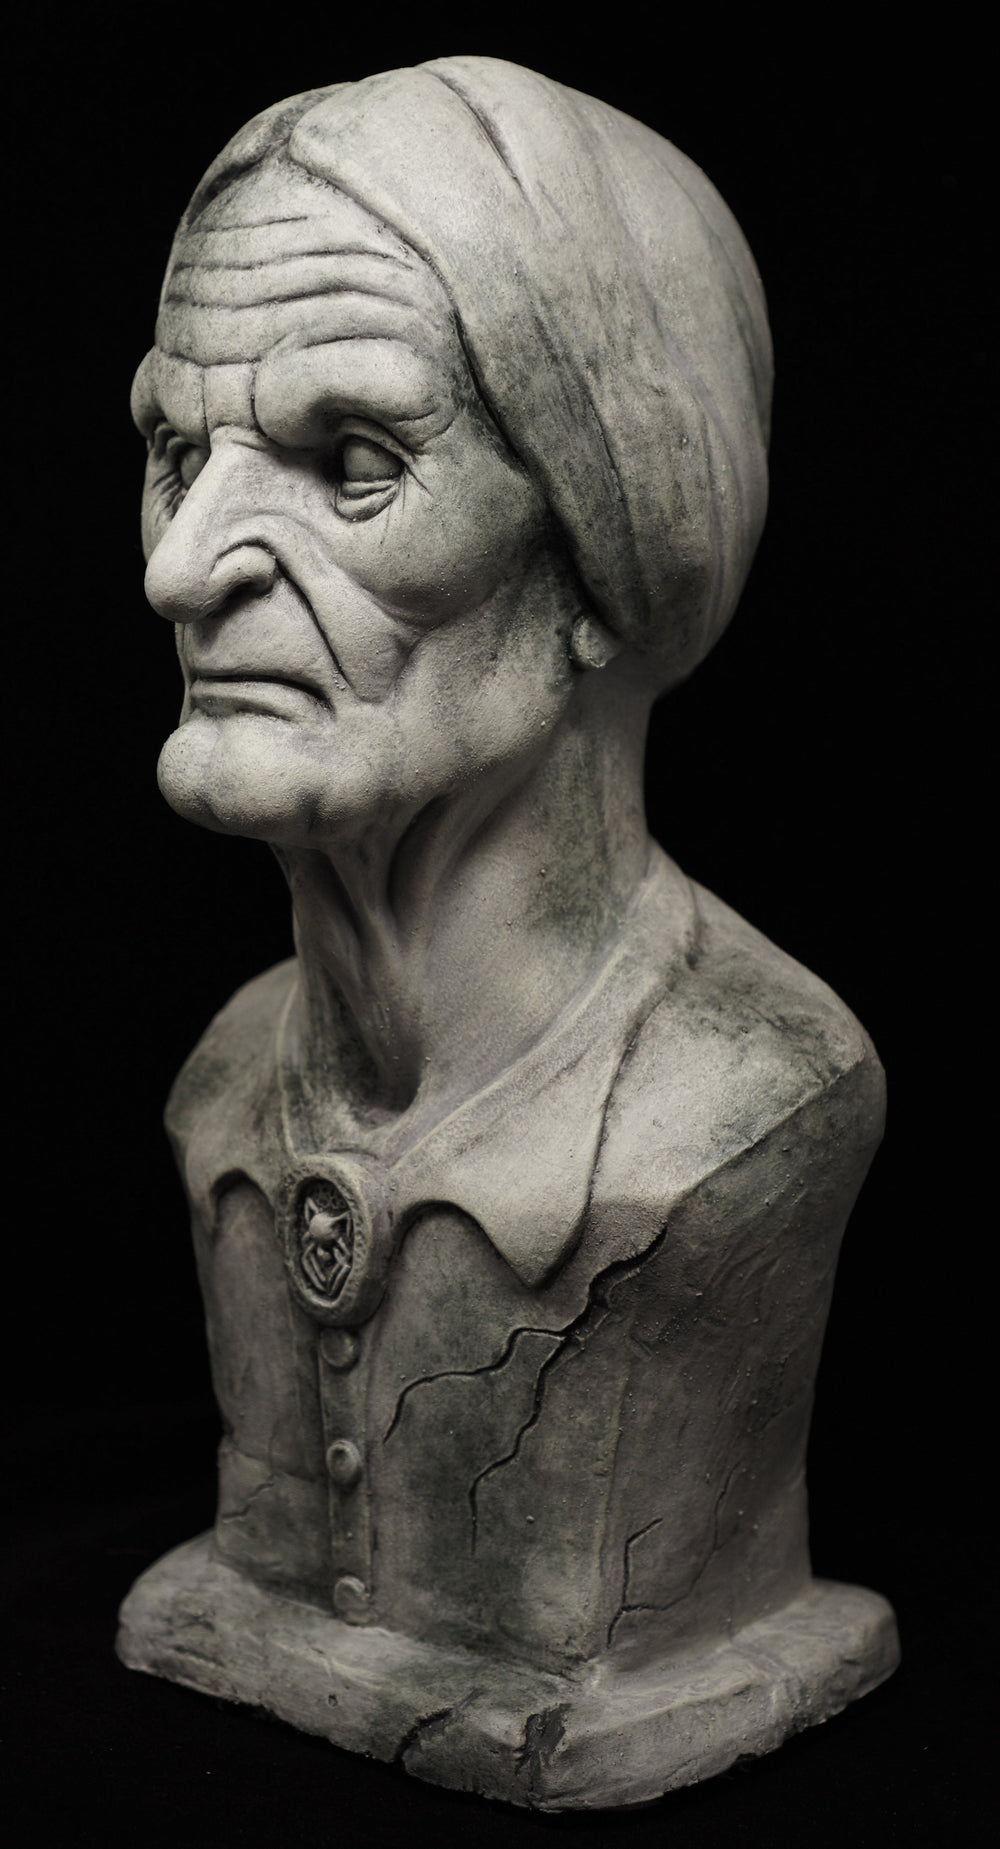 NEW for 2022 - "Madam Macy Ghostly Manor Bust" Halloween Decoration